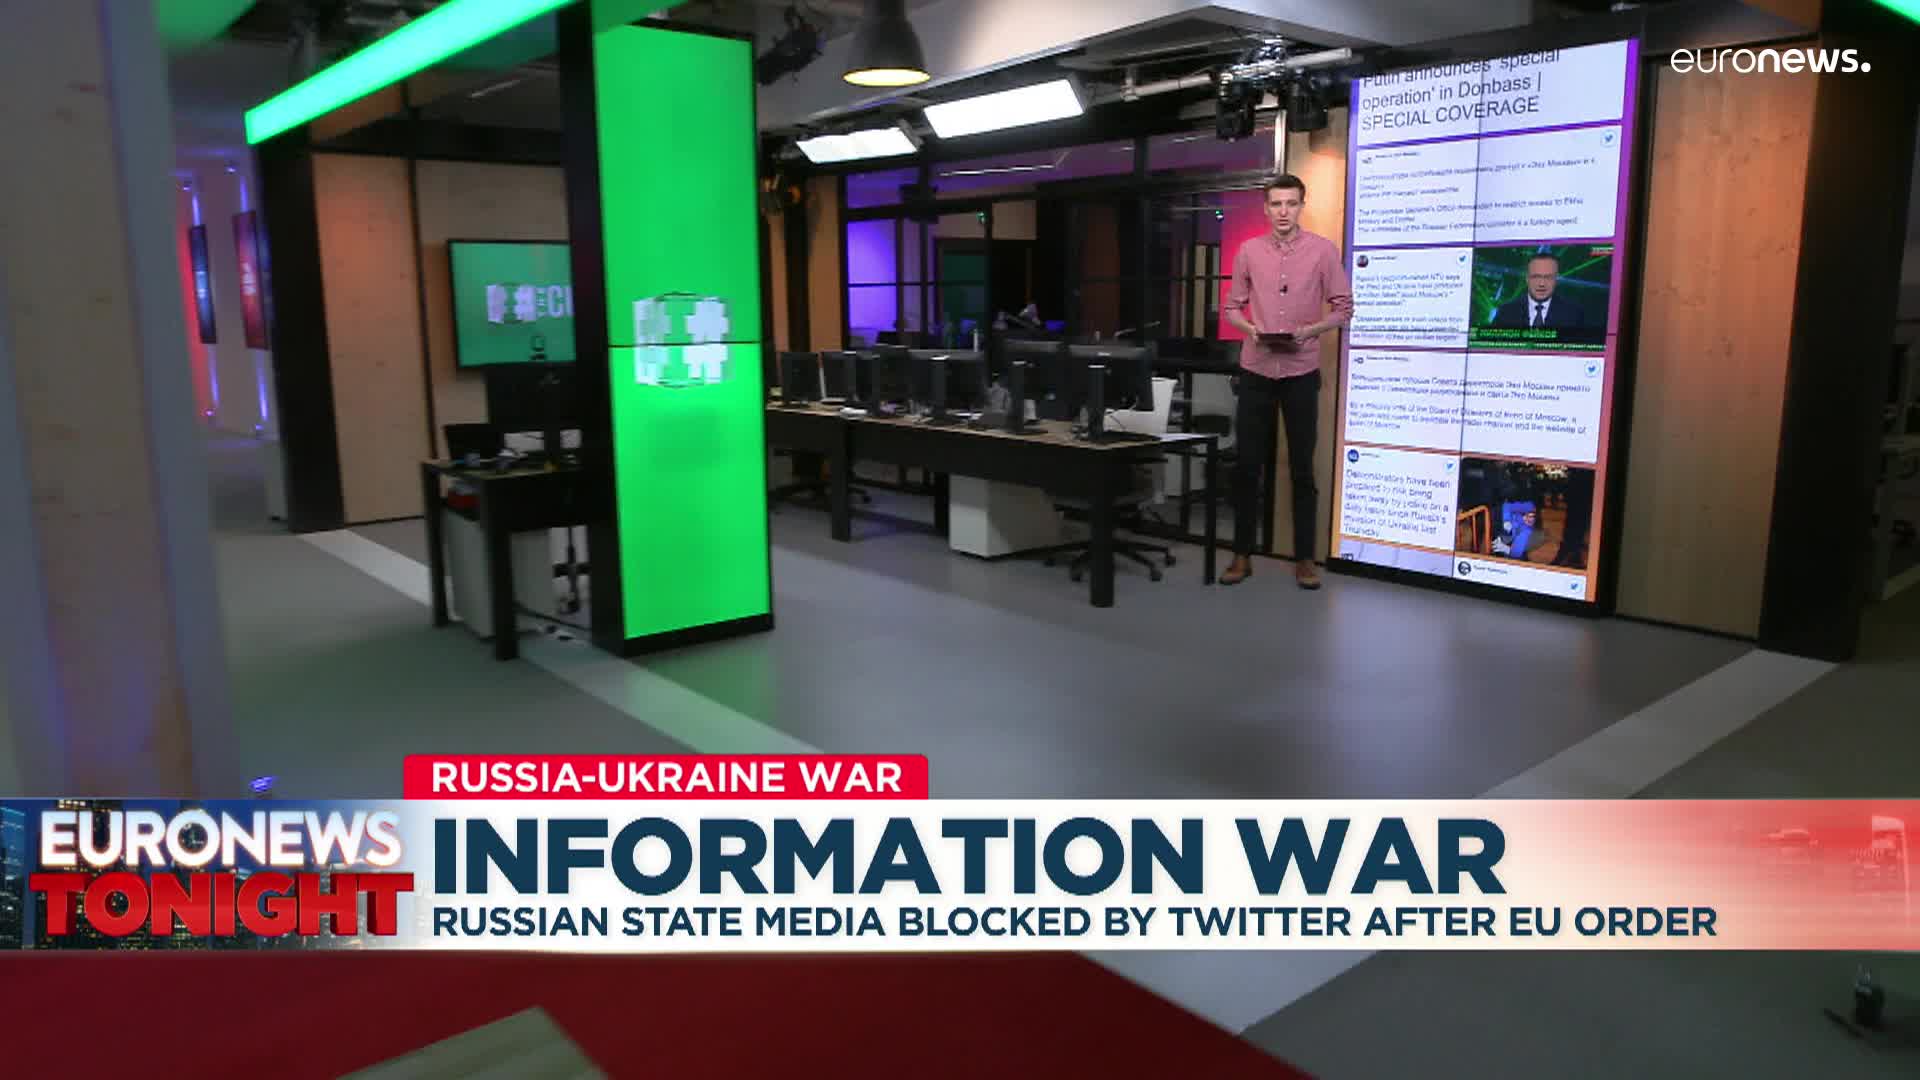 Two independent Russian media outlets forced off air amid Ukraine war